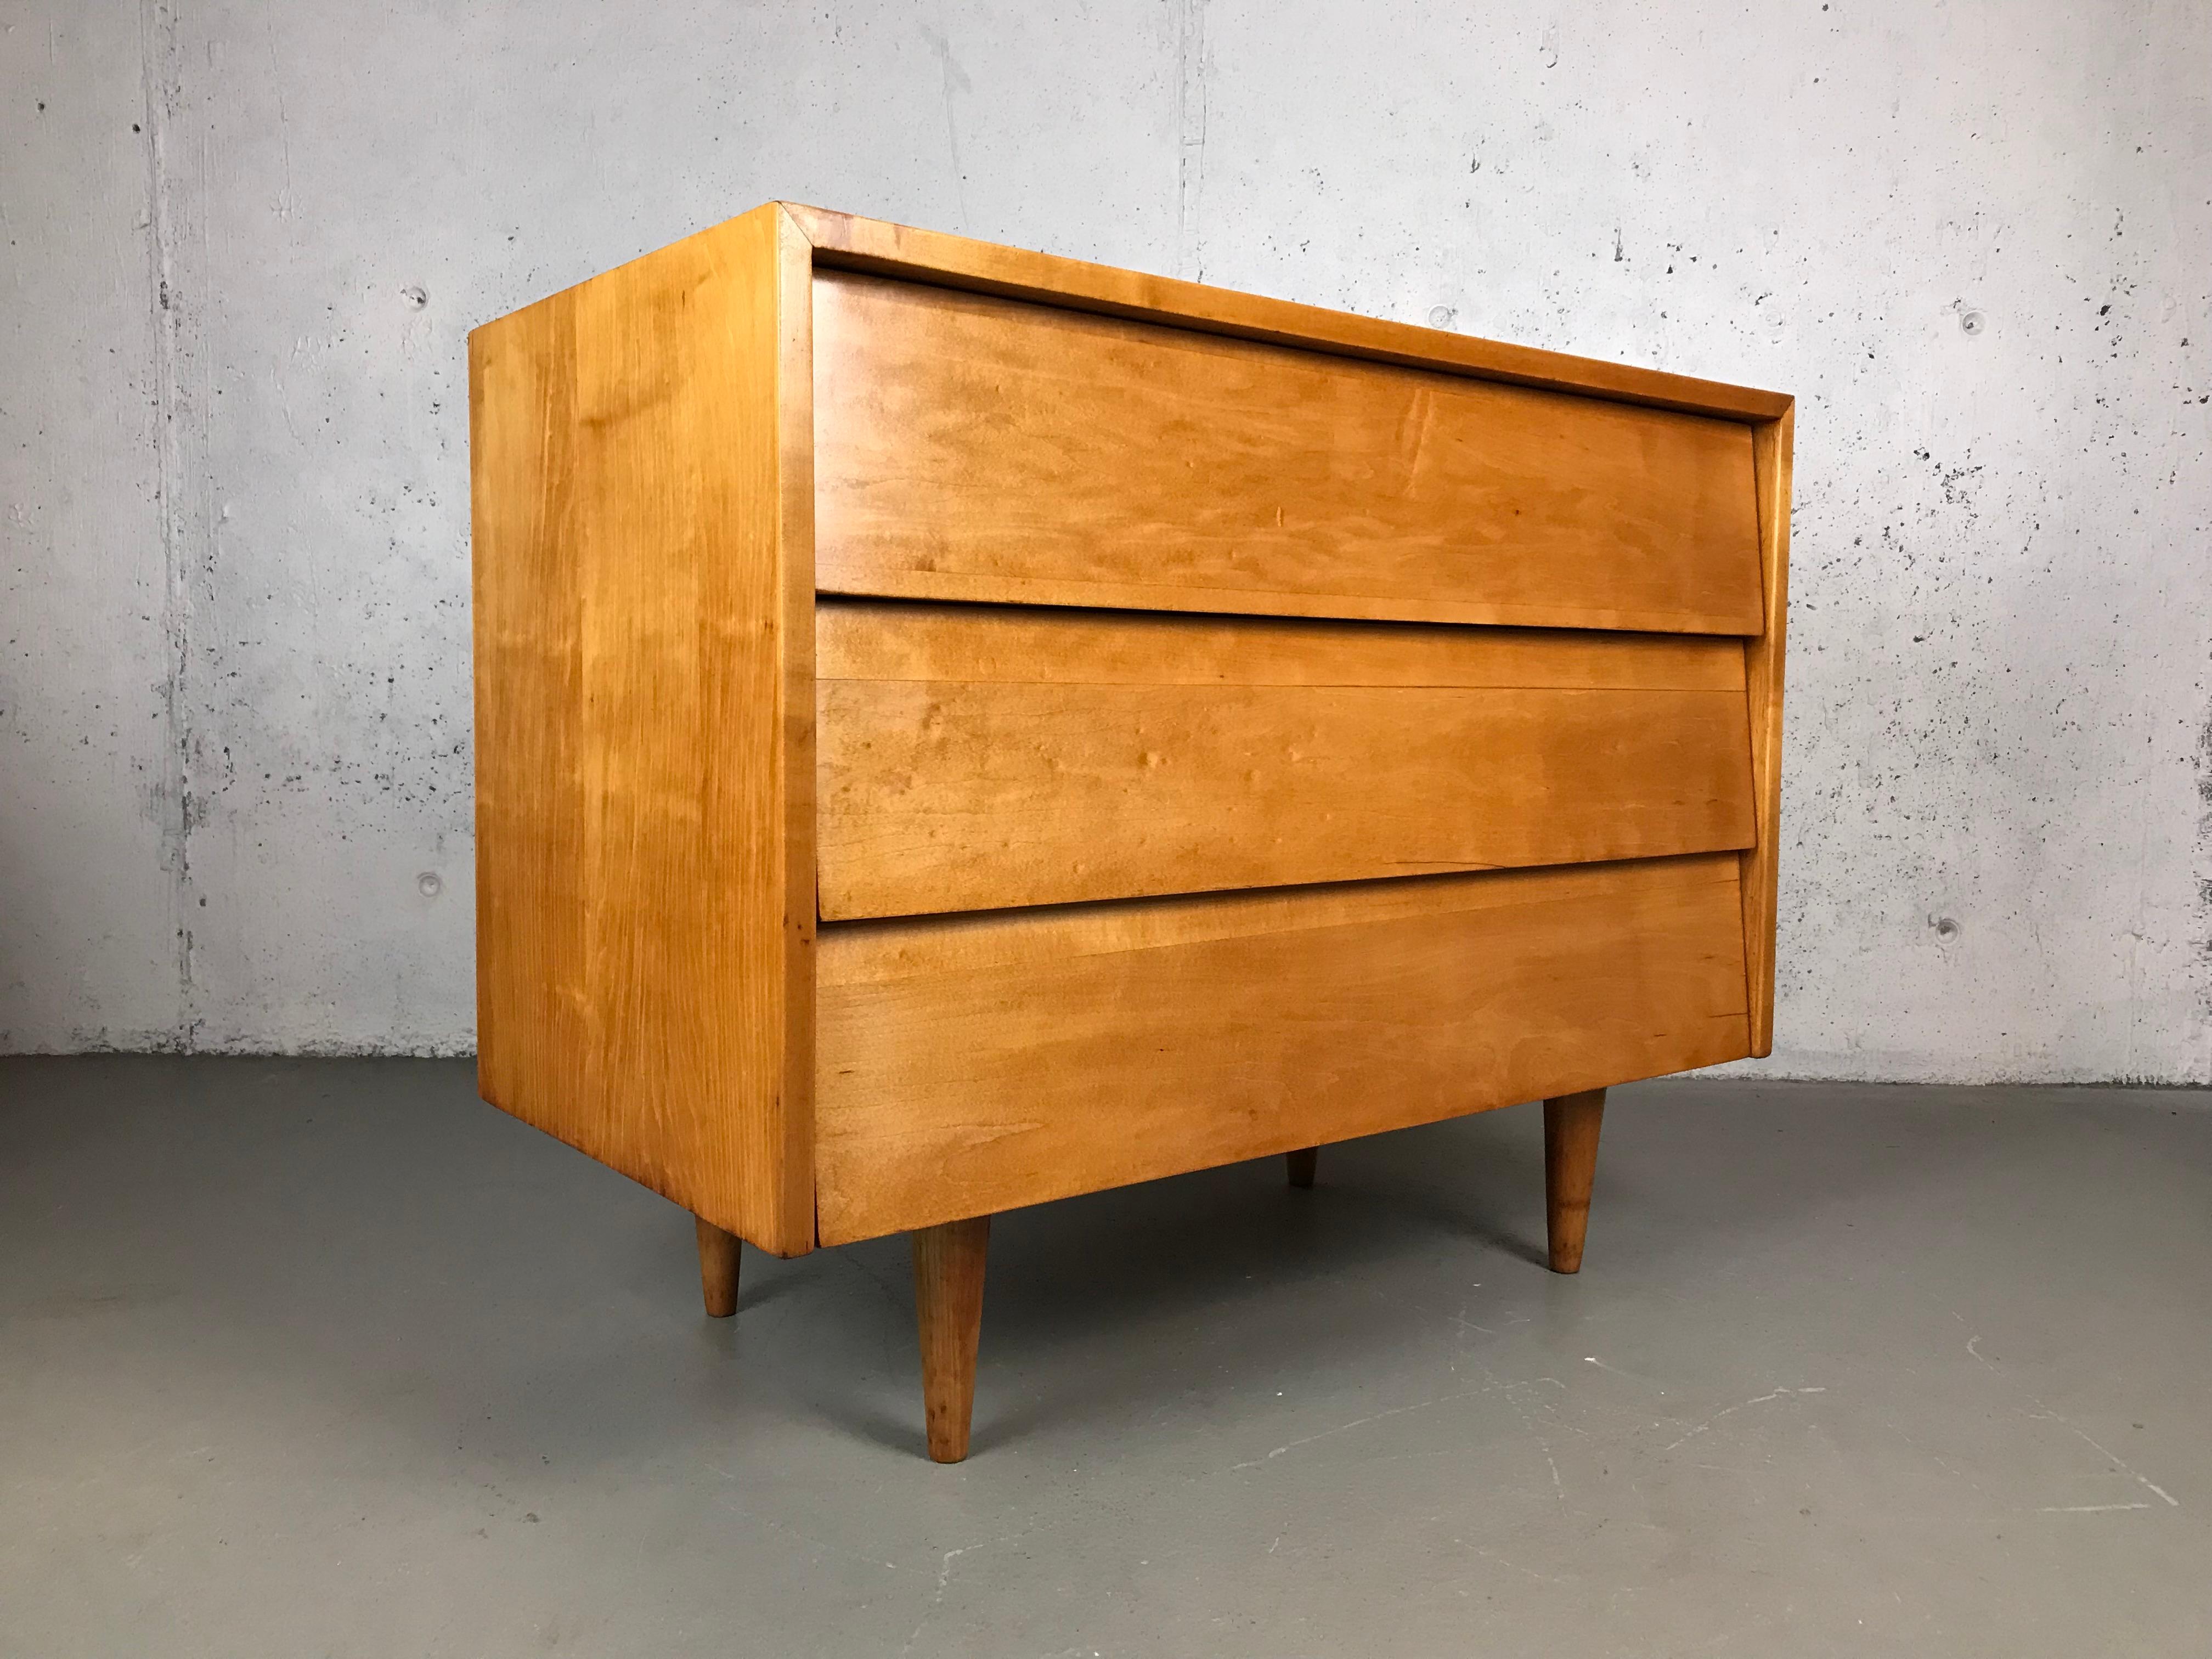 American Early Dresser Chest in Birch by Florence Knoll for Knoll Associates in 1948